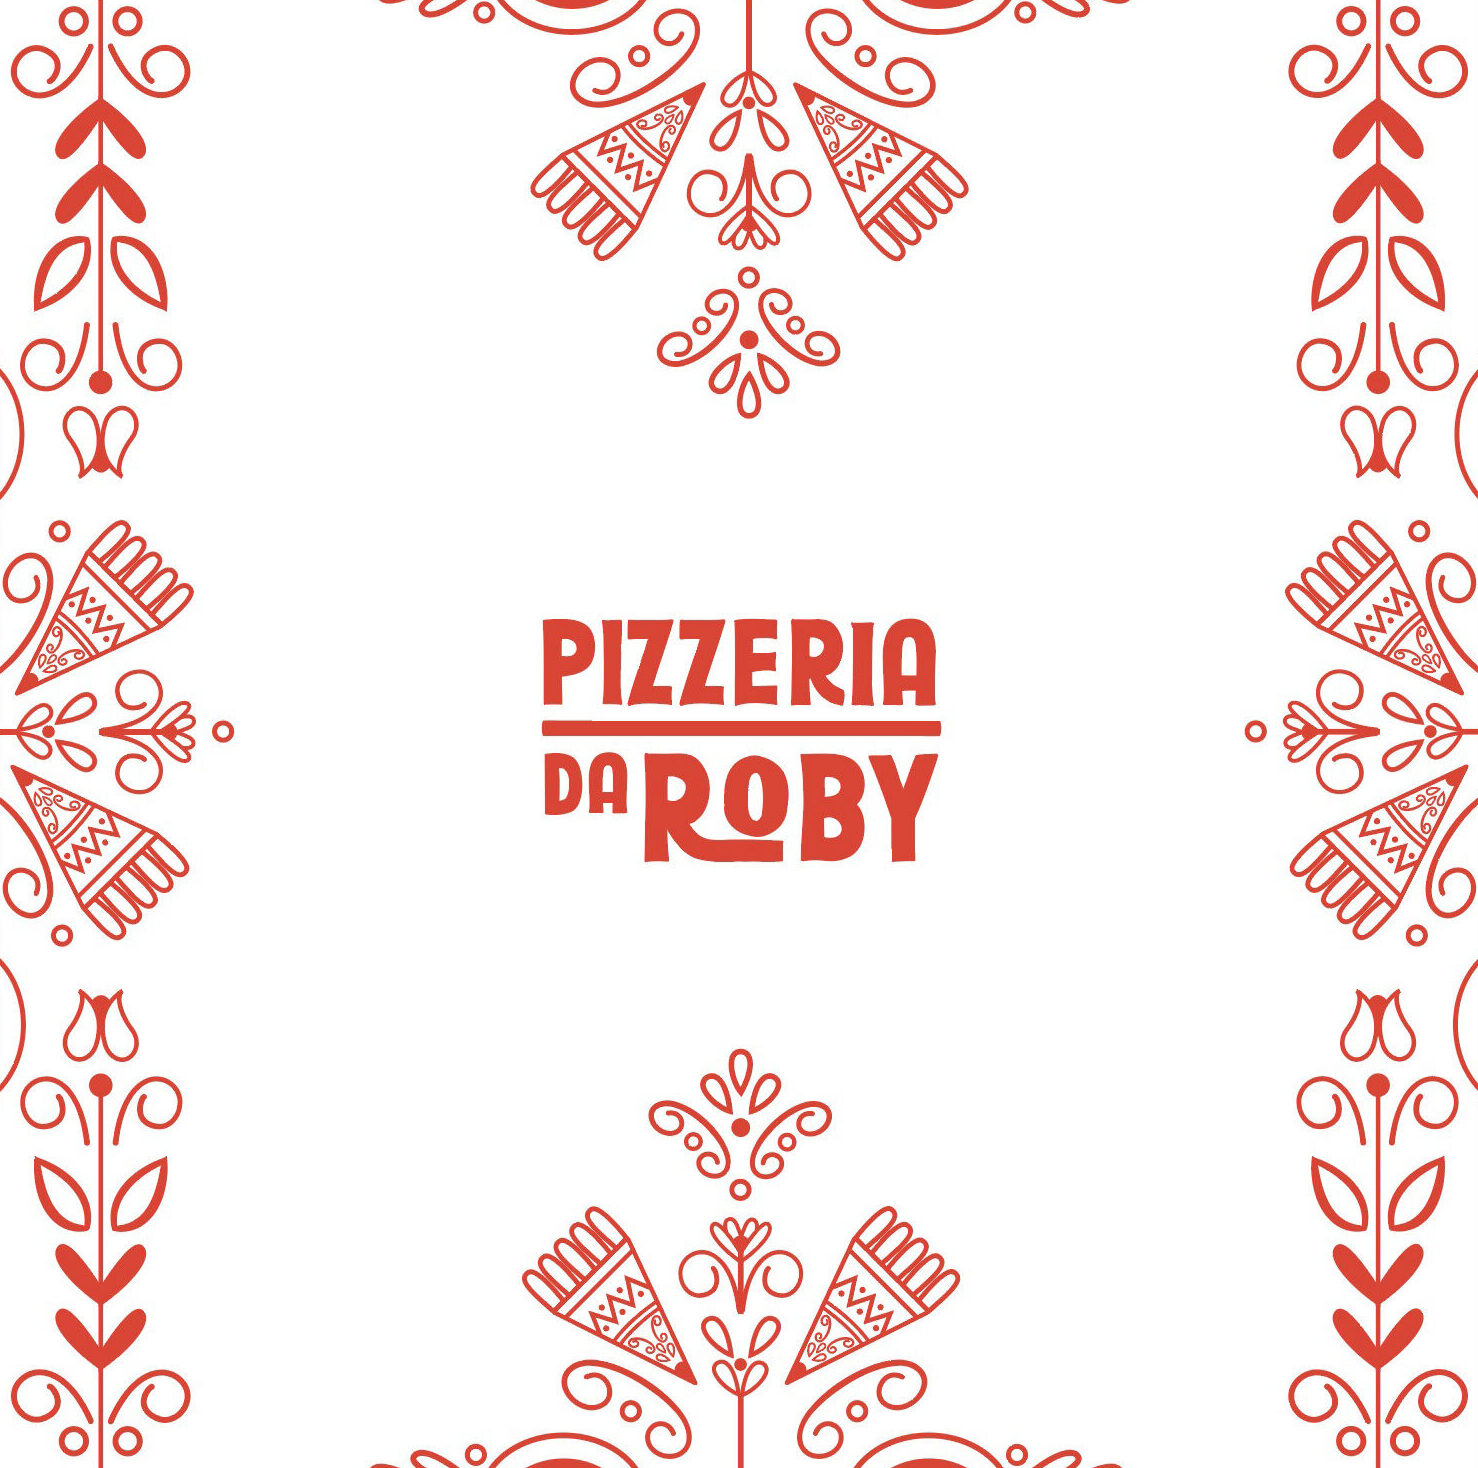 Pizzeria da roby illustrations in red for a pizza box.